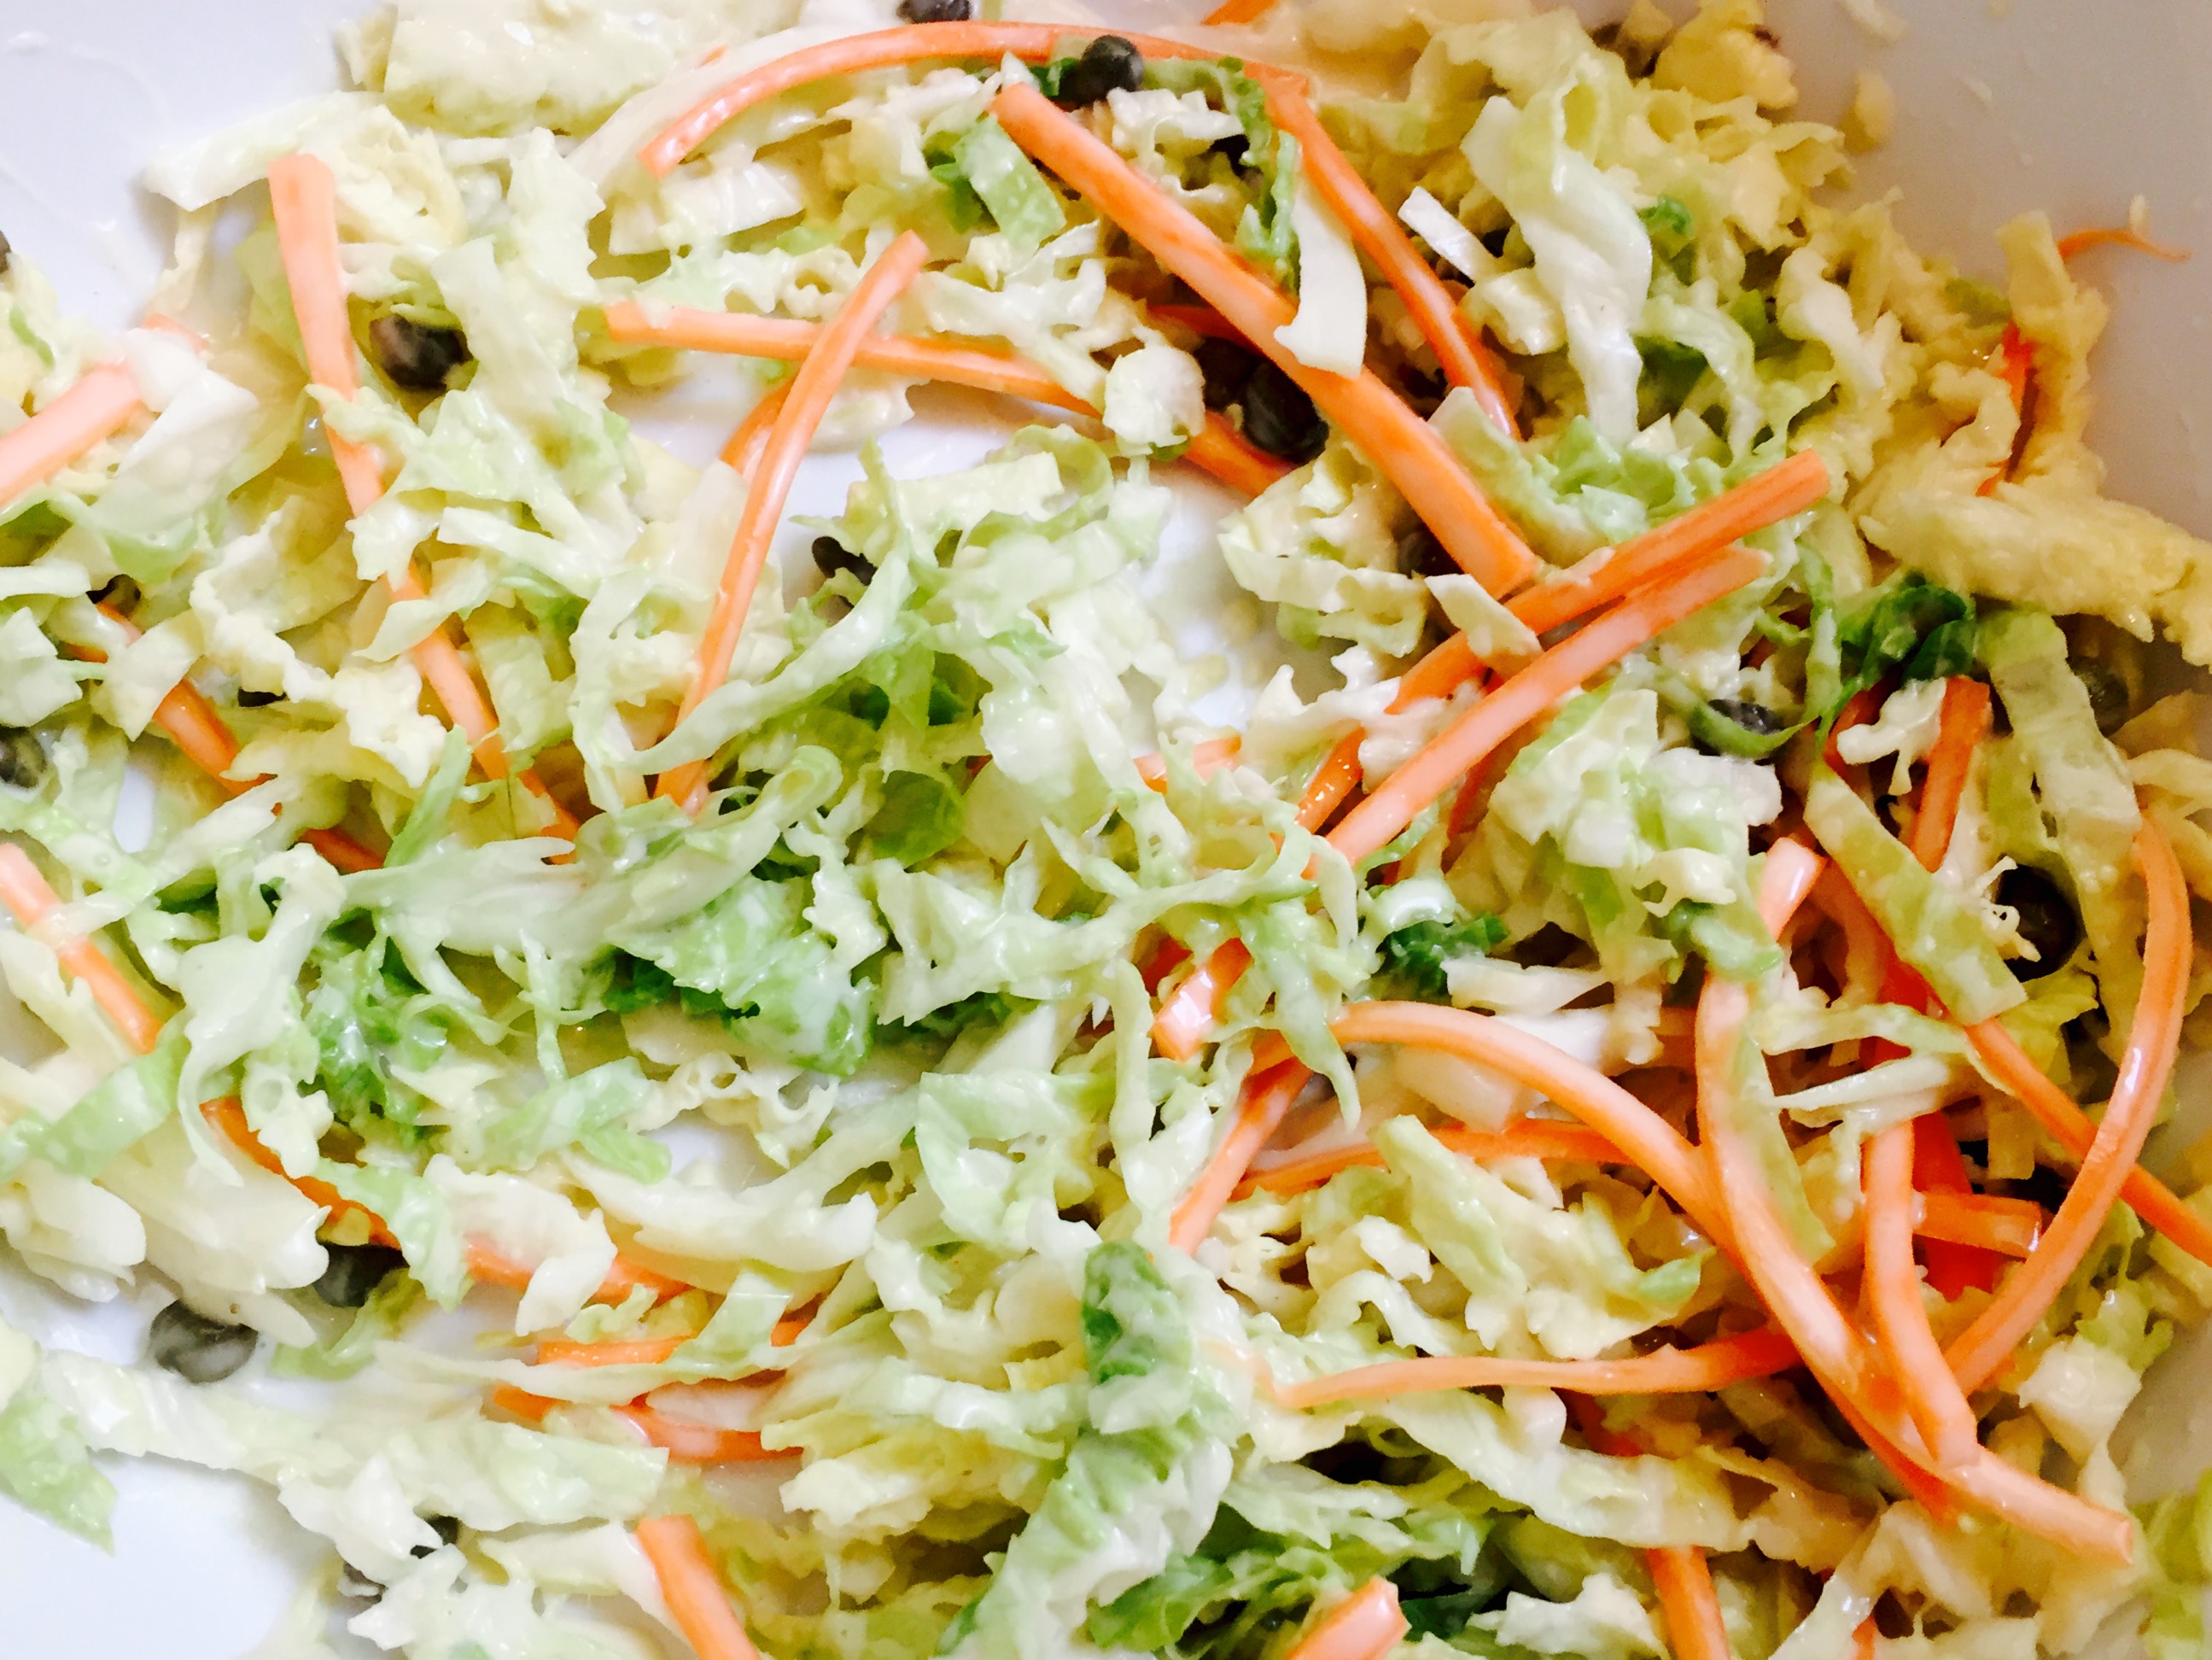 Crunchy coleslaw with capers in a creamy dairy free dressing